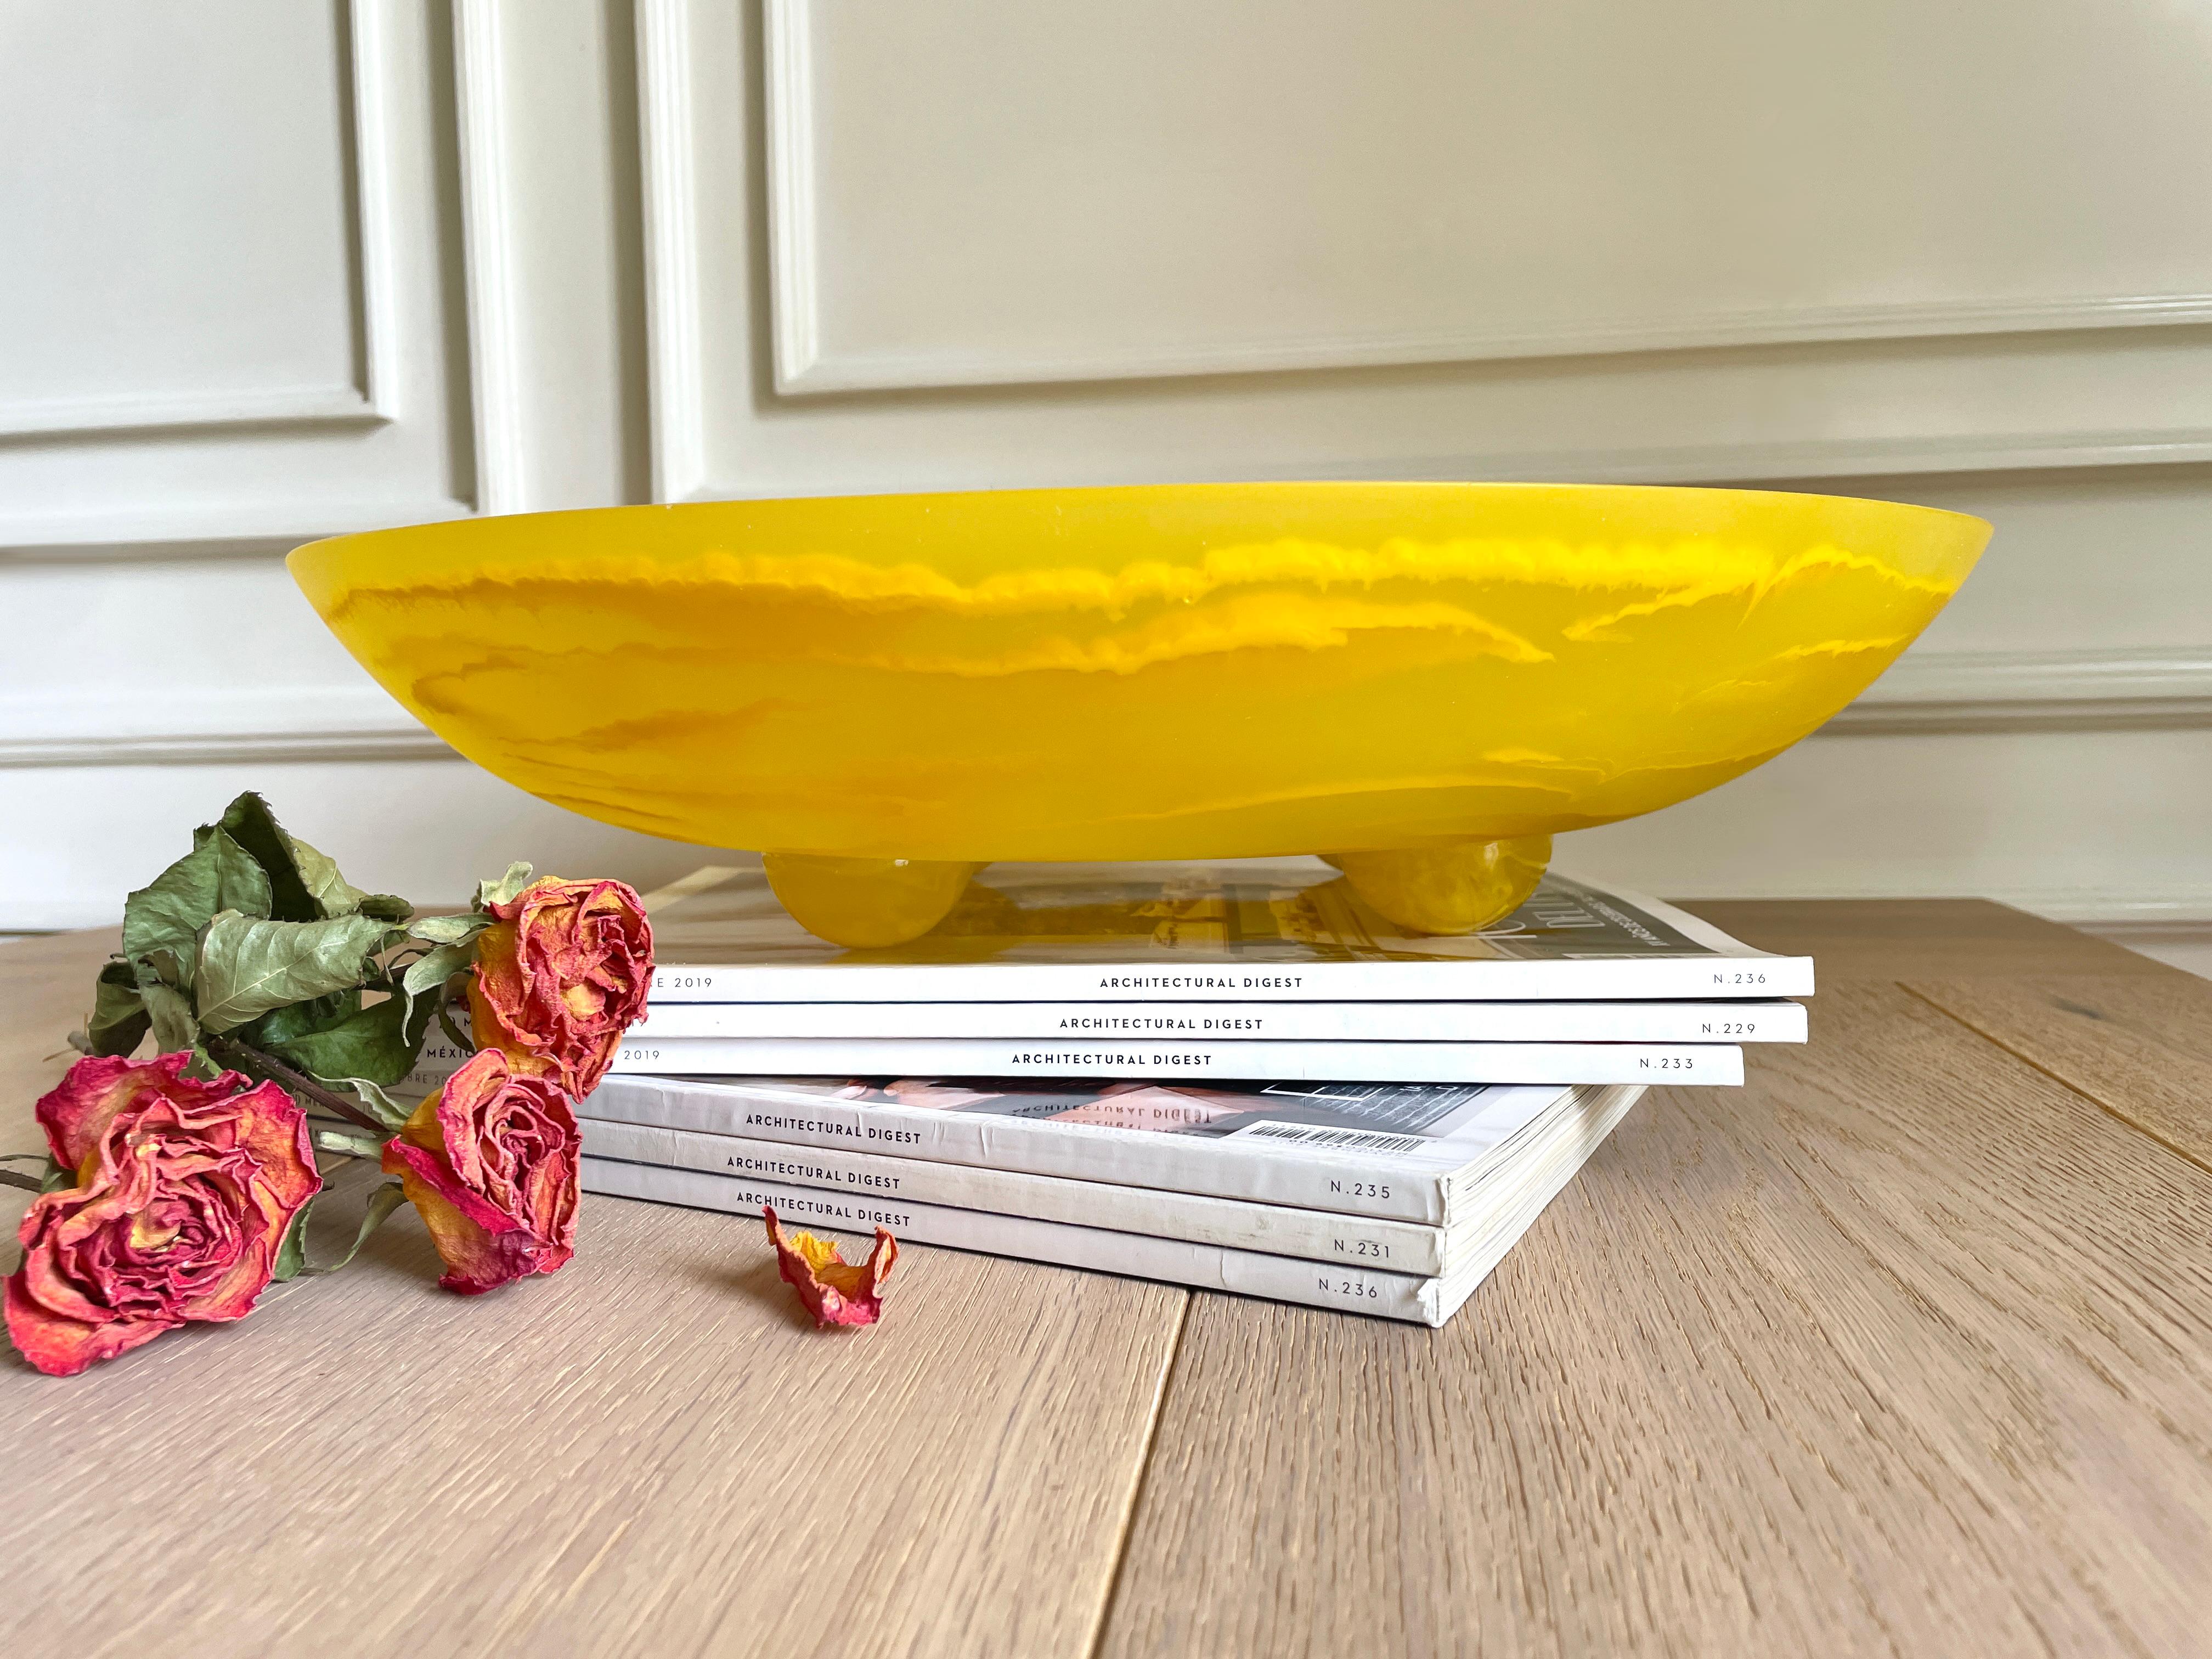 An elegant XL round bowl that is supported by four half spheres that make a fun, bold and unique piece great for holding fruit, plants and specially everyone's attention. You can have it on display on a kitchen counter or use it as a centerpiece on